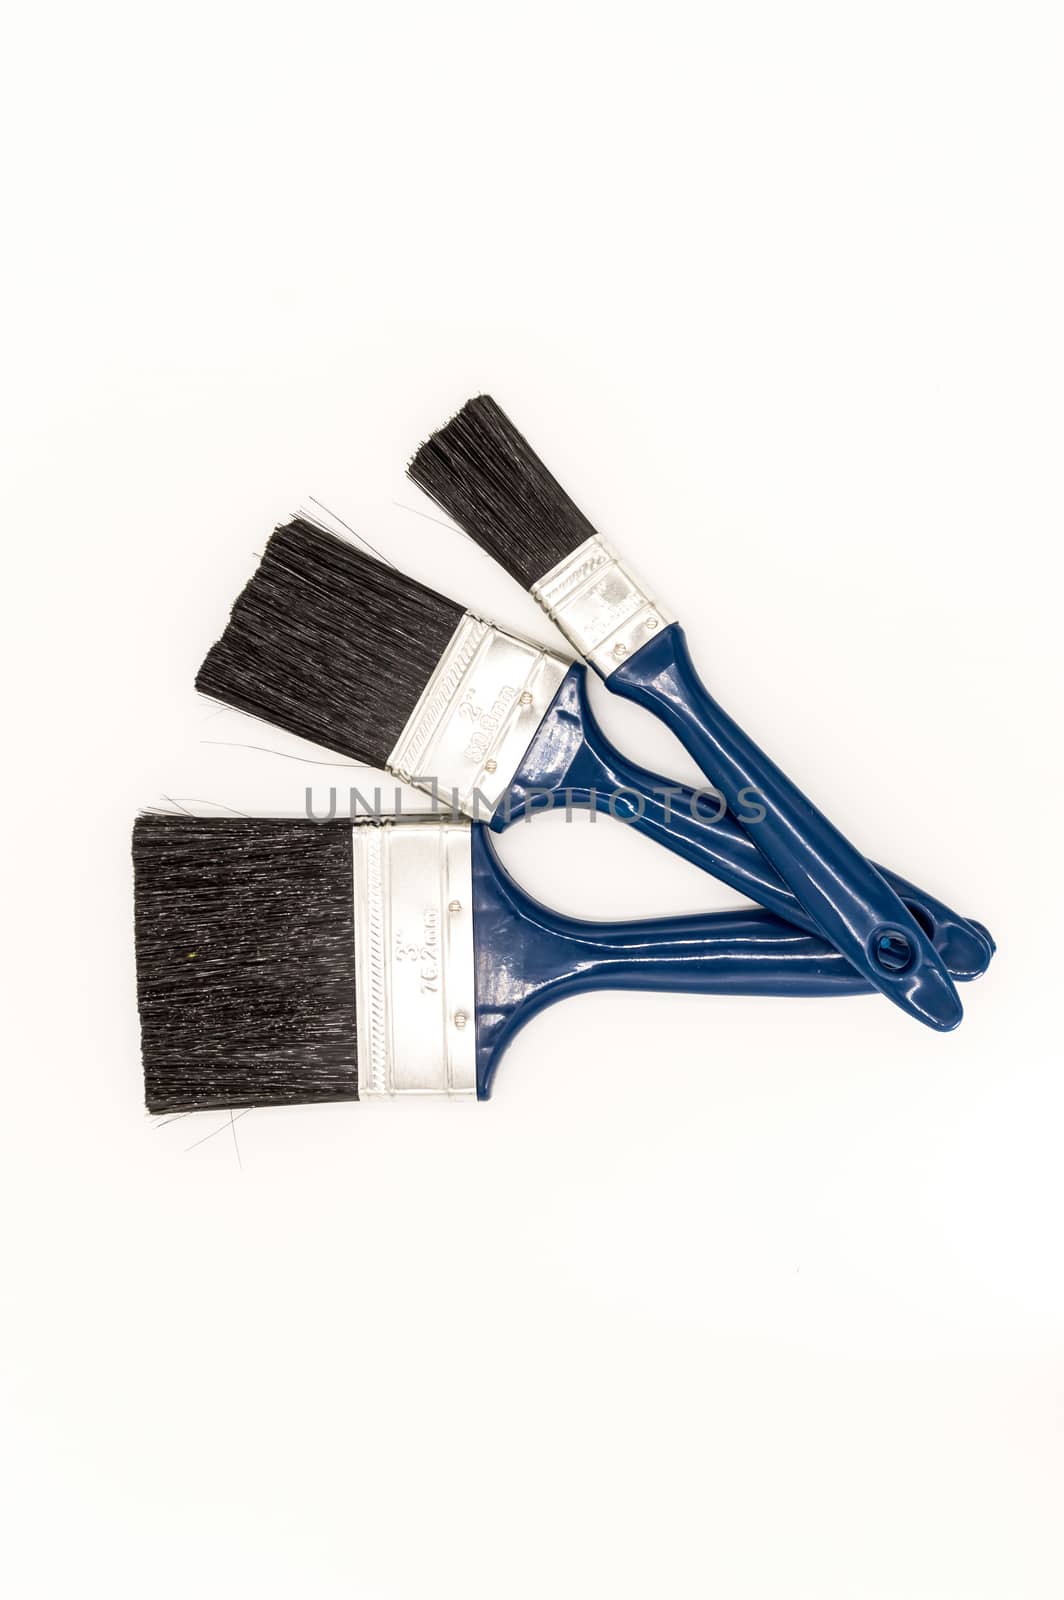 Three paint brushes with blue colored  by Philou1000